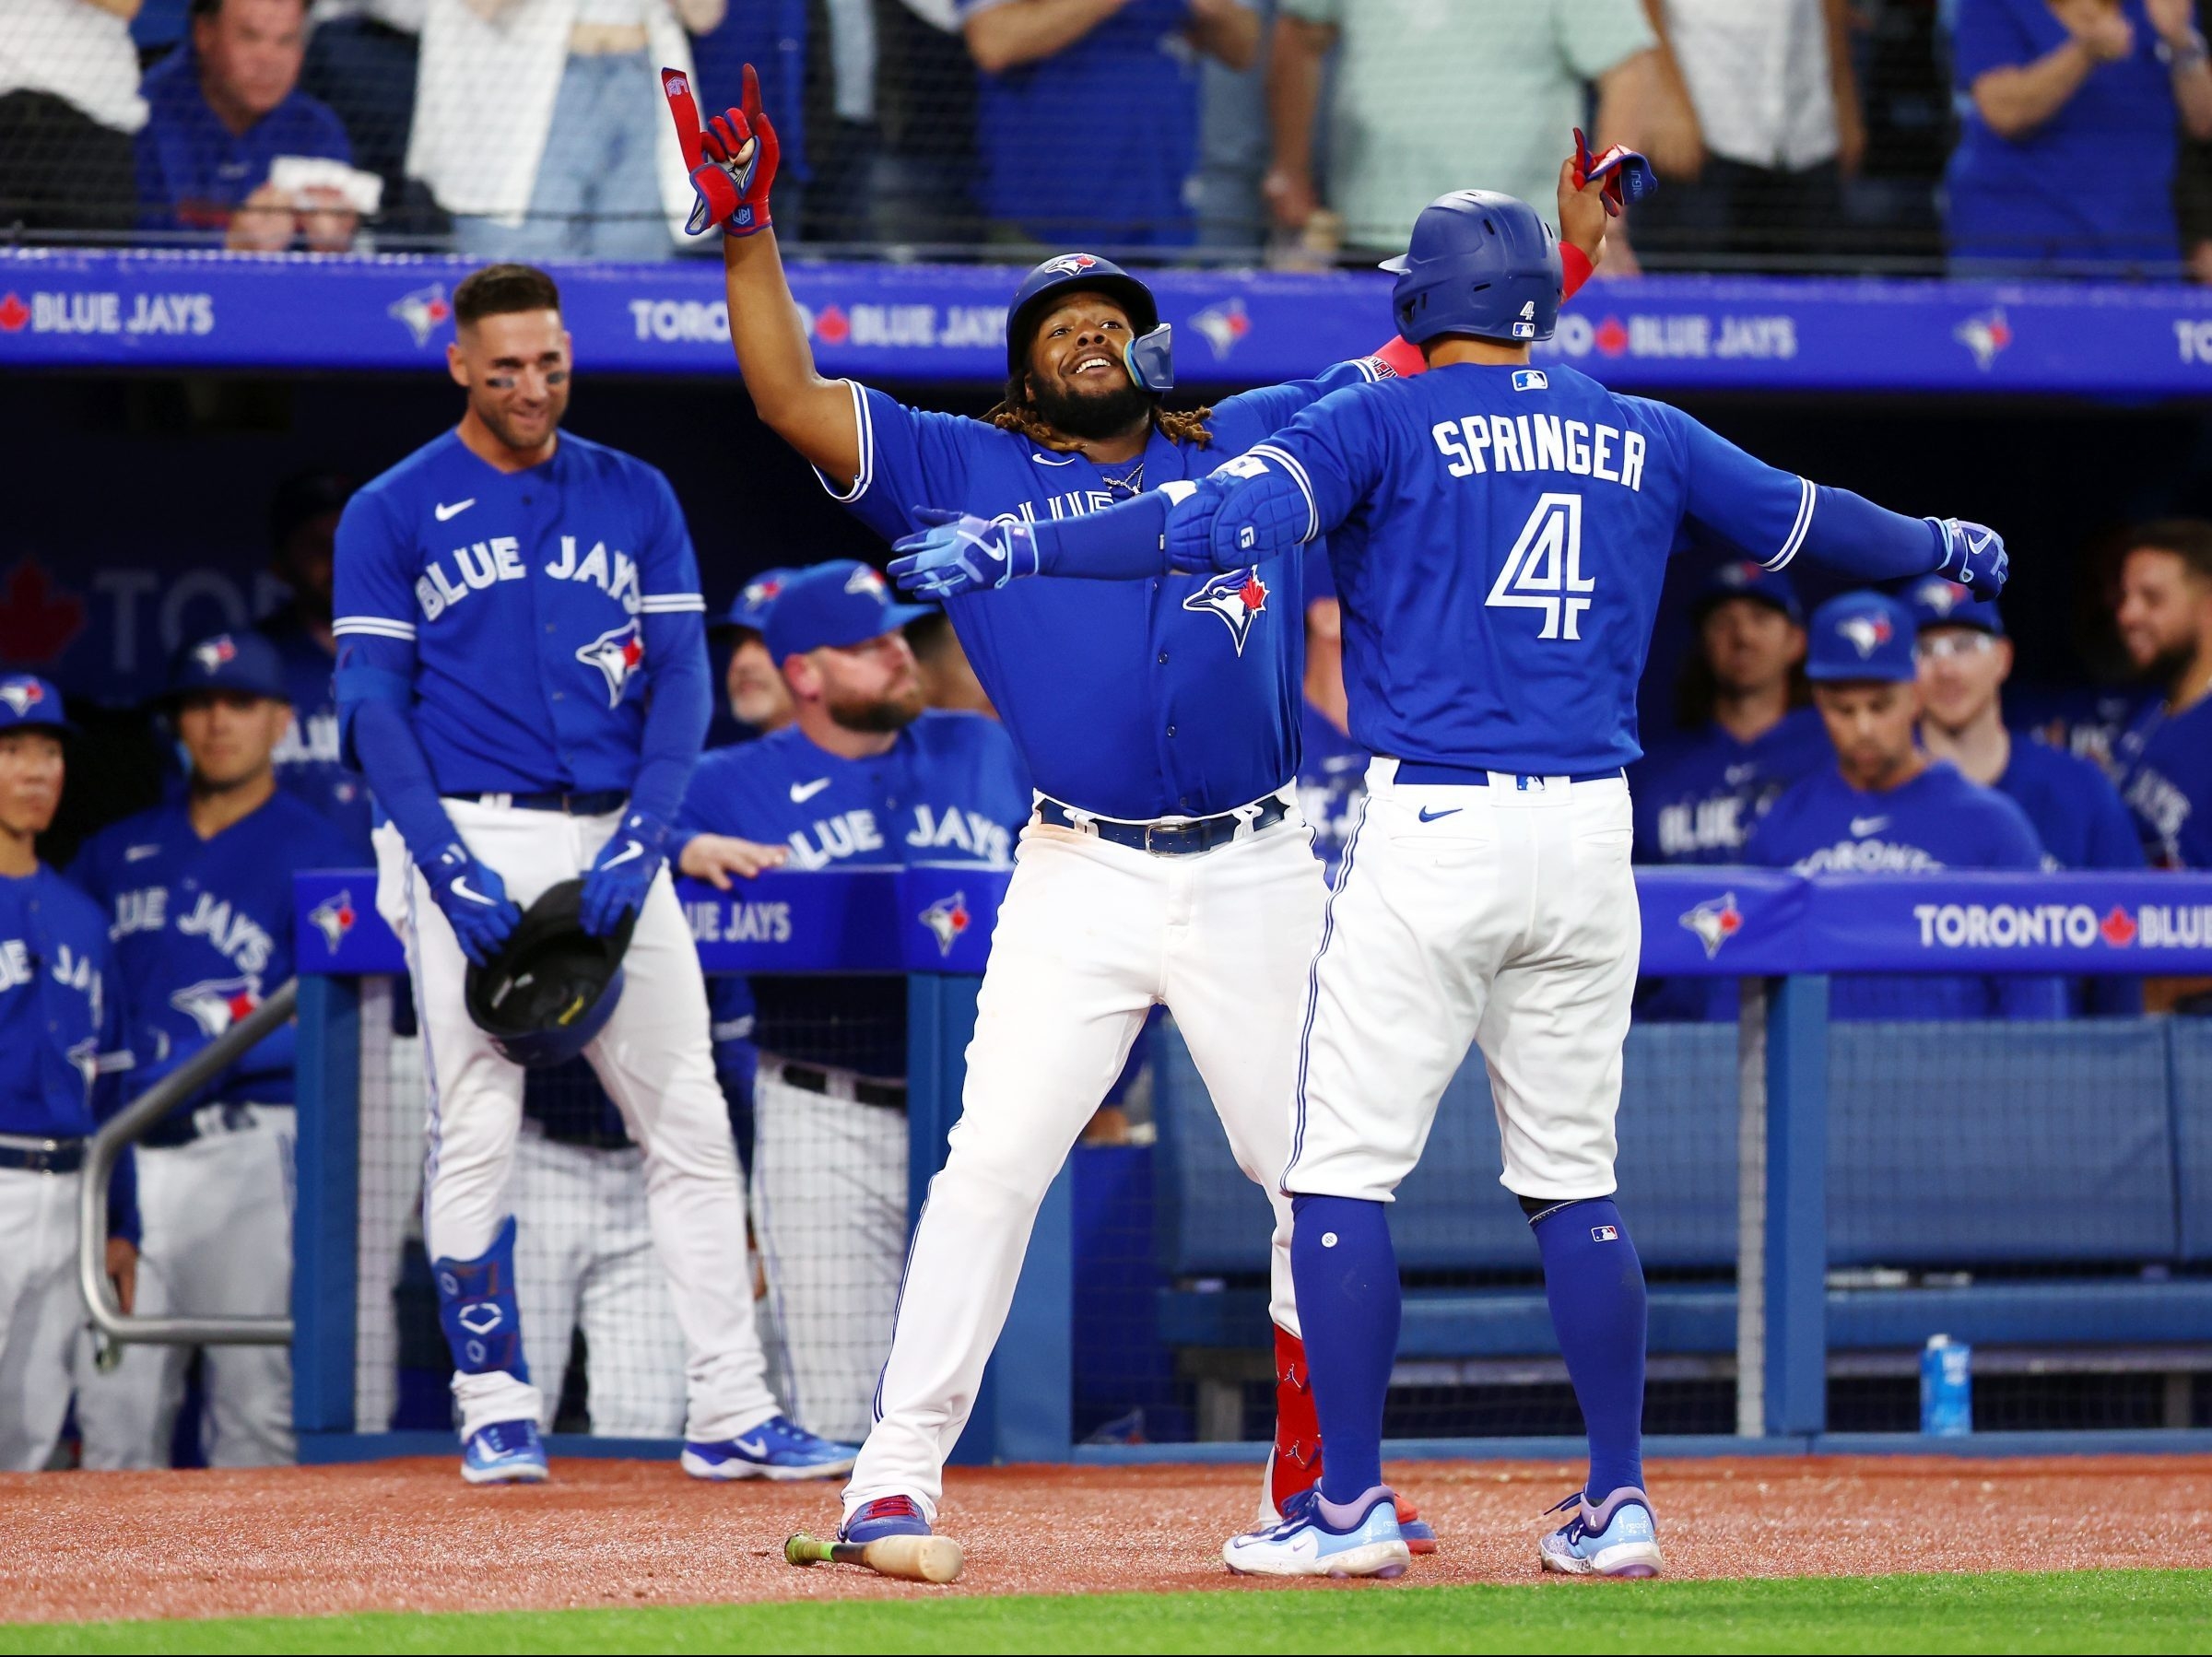 Blue Jays turn into boom Jays in homer-happy home opener